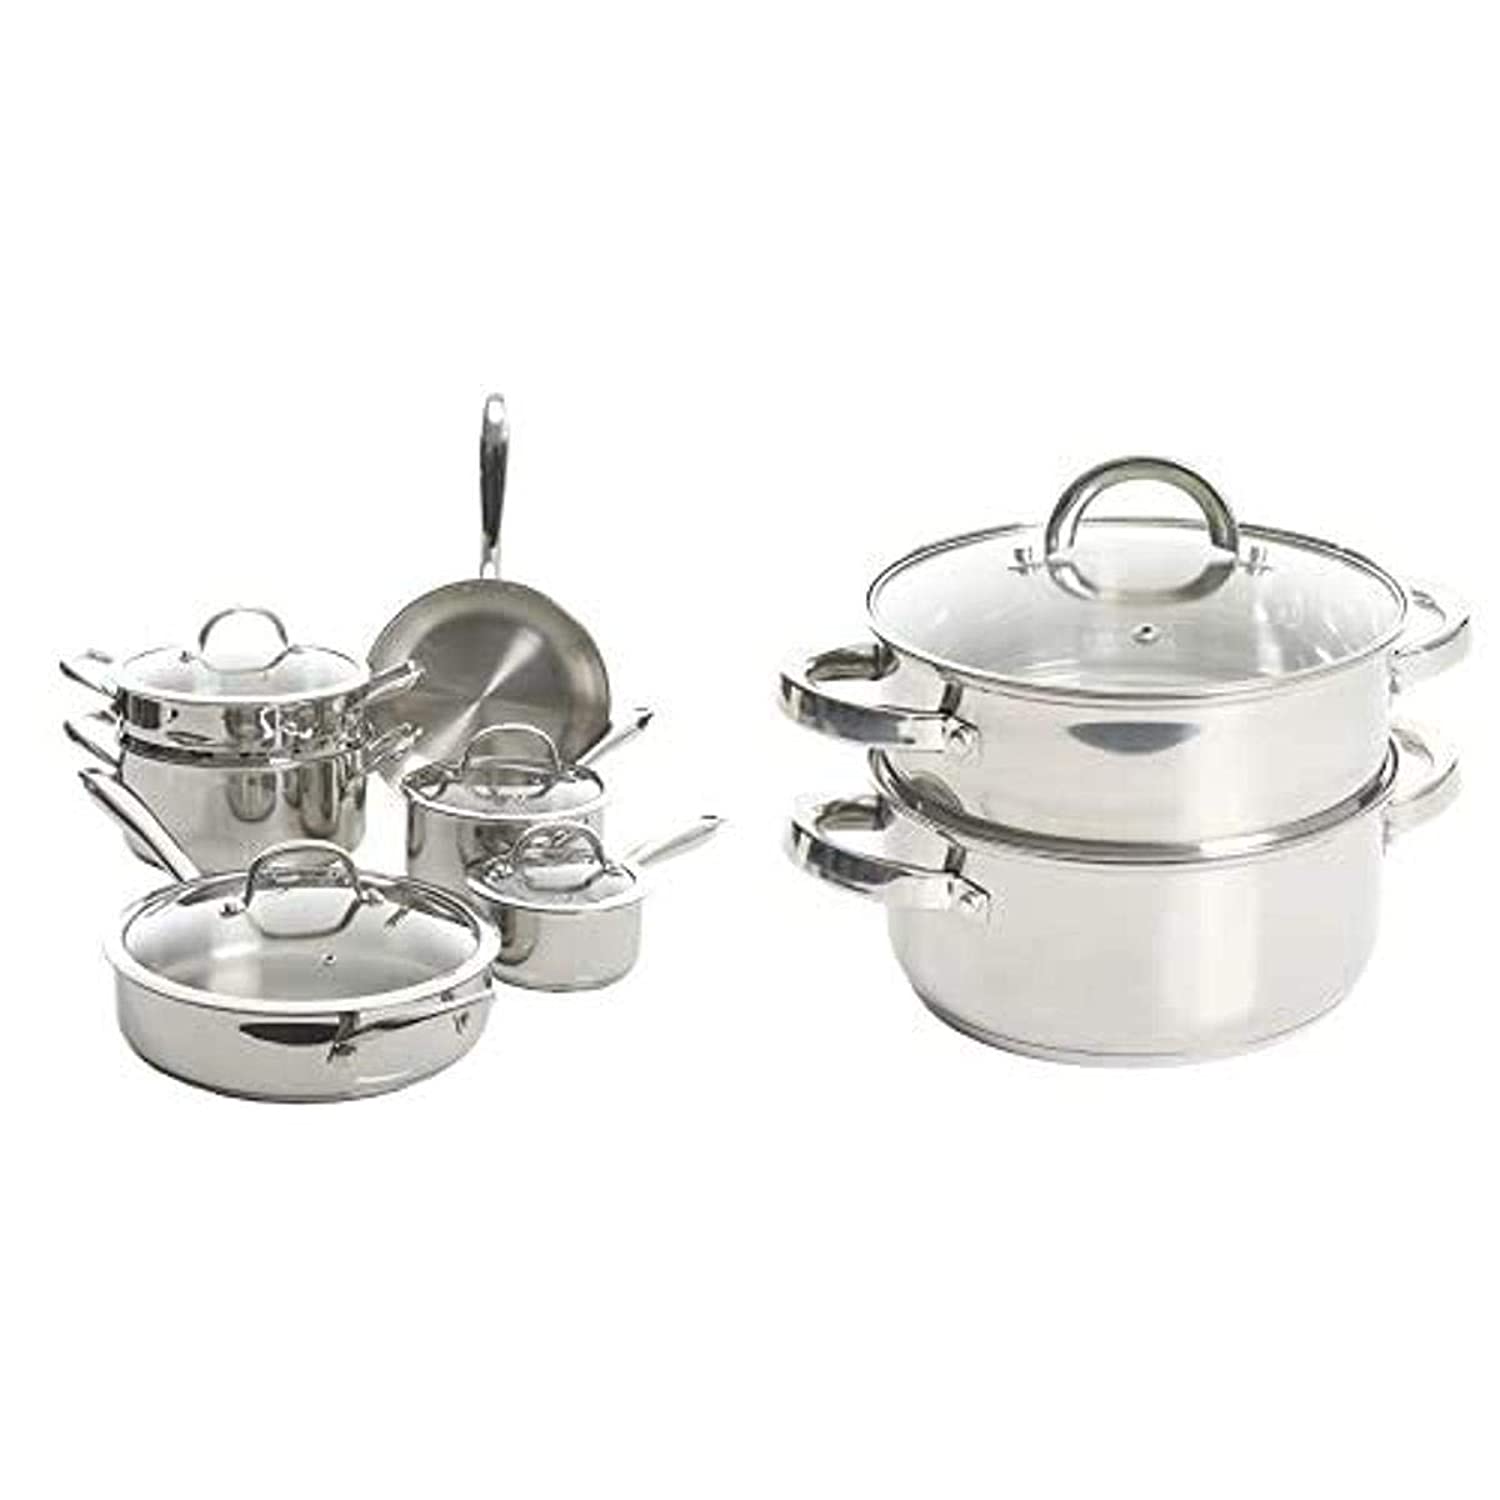 Kenmore Devon Stainless Steel Cookware and Oster Steamer Combo